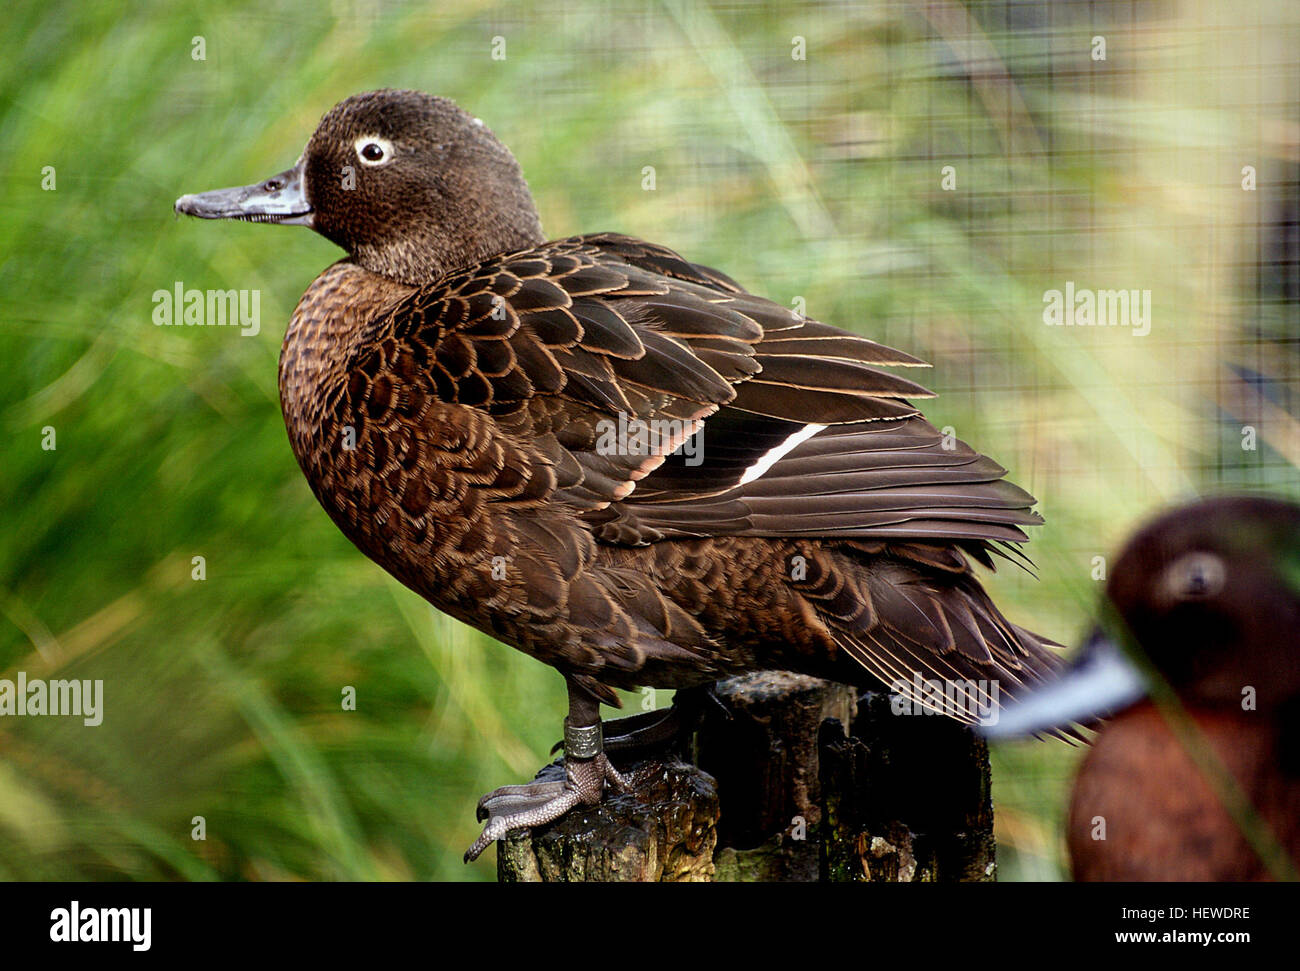 The BrownTeal (Anas chlorotis) or pateke is a small dabbling duck